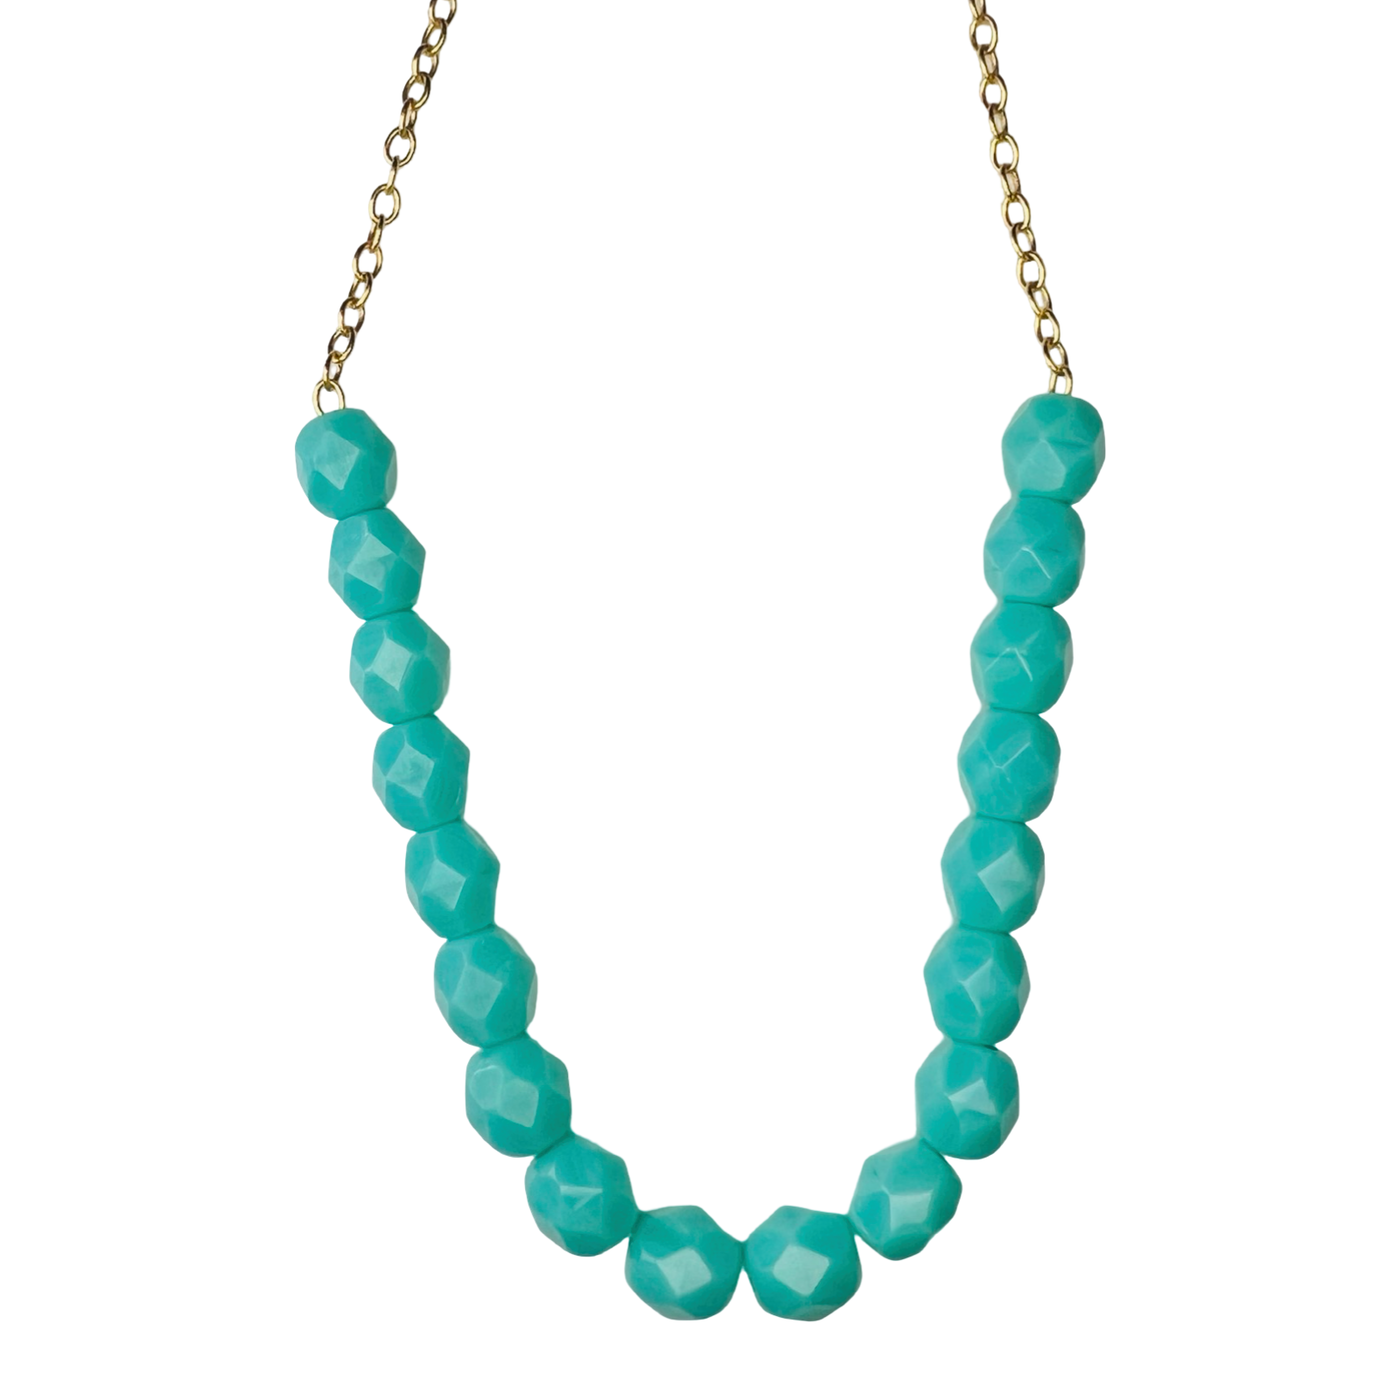 Turquoise bead necklace with a gold chain